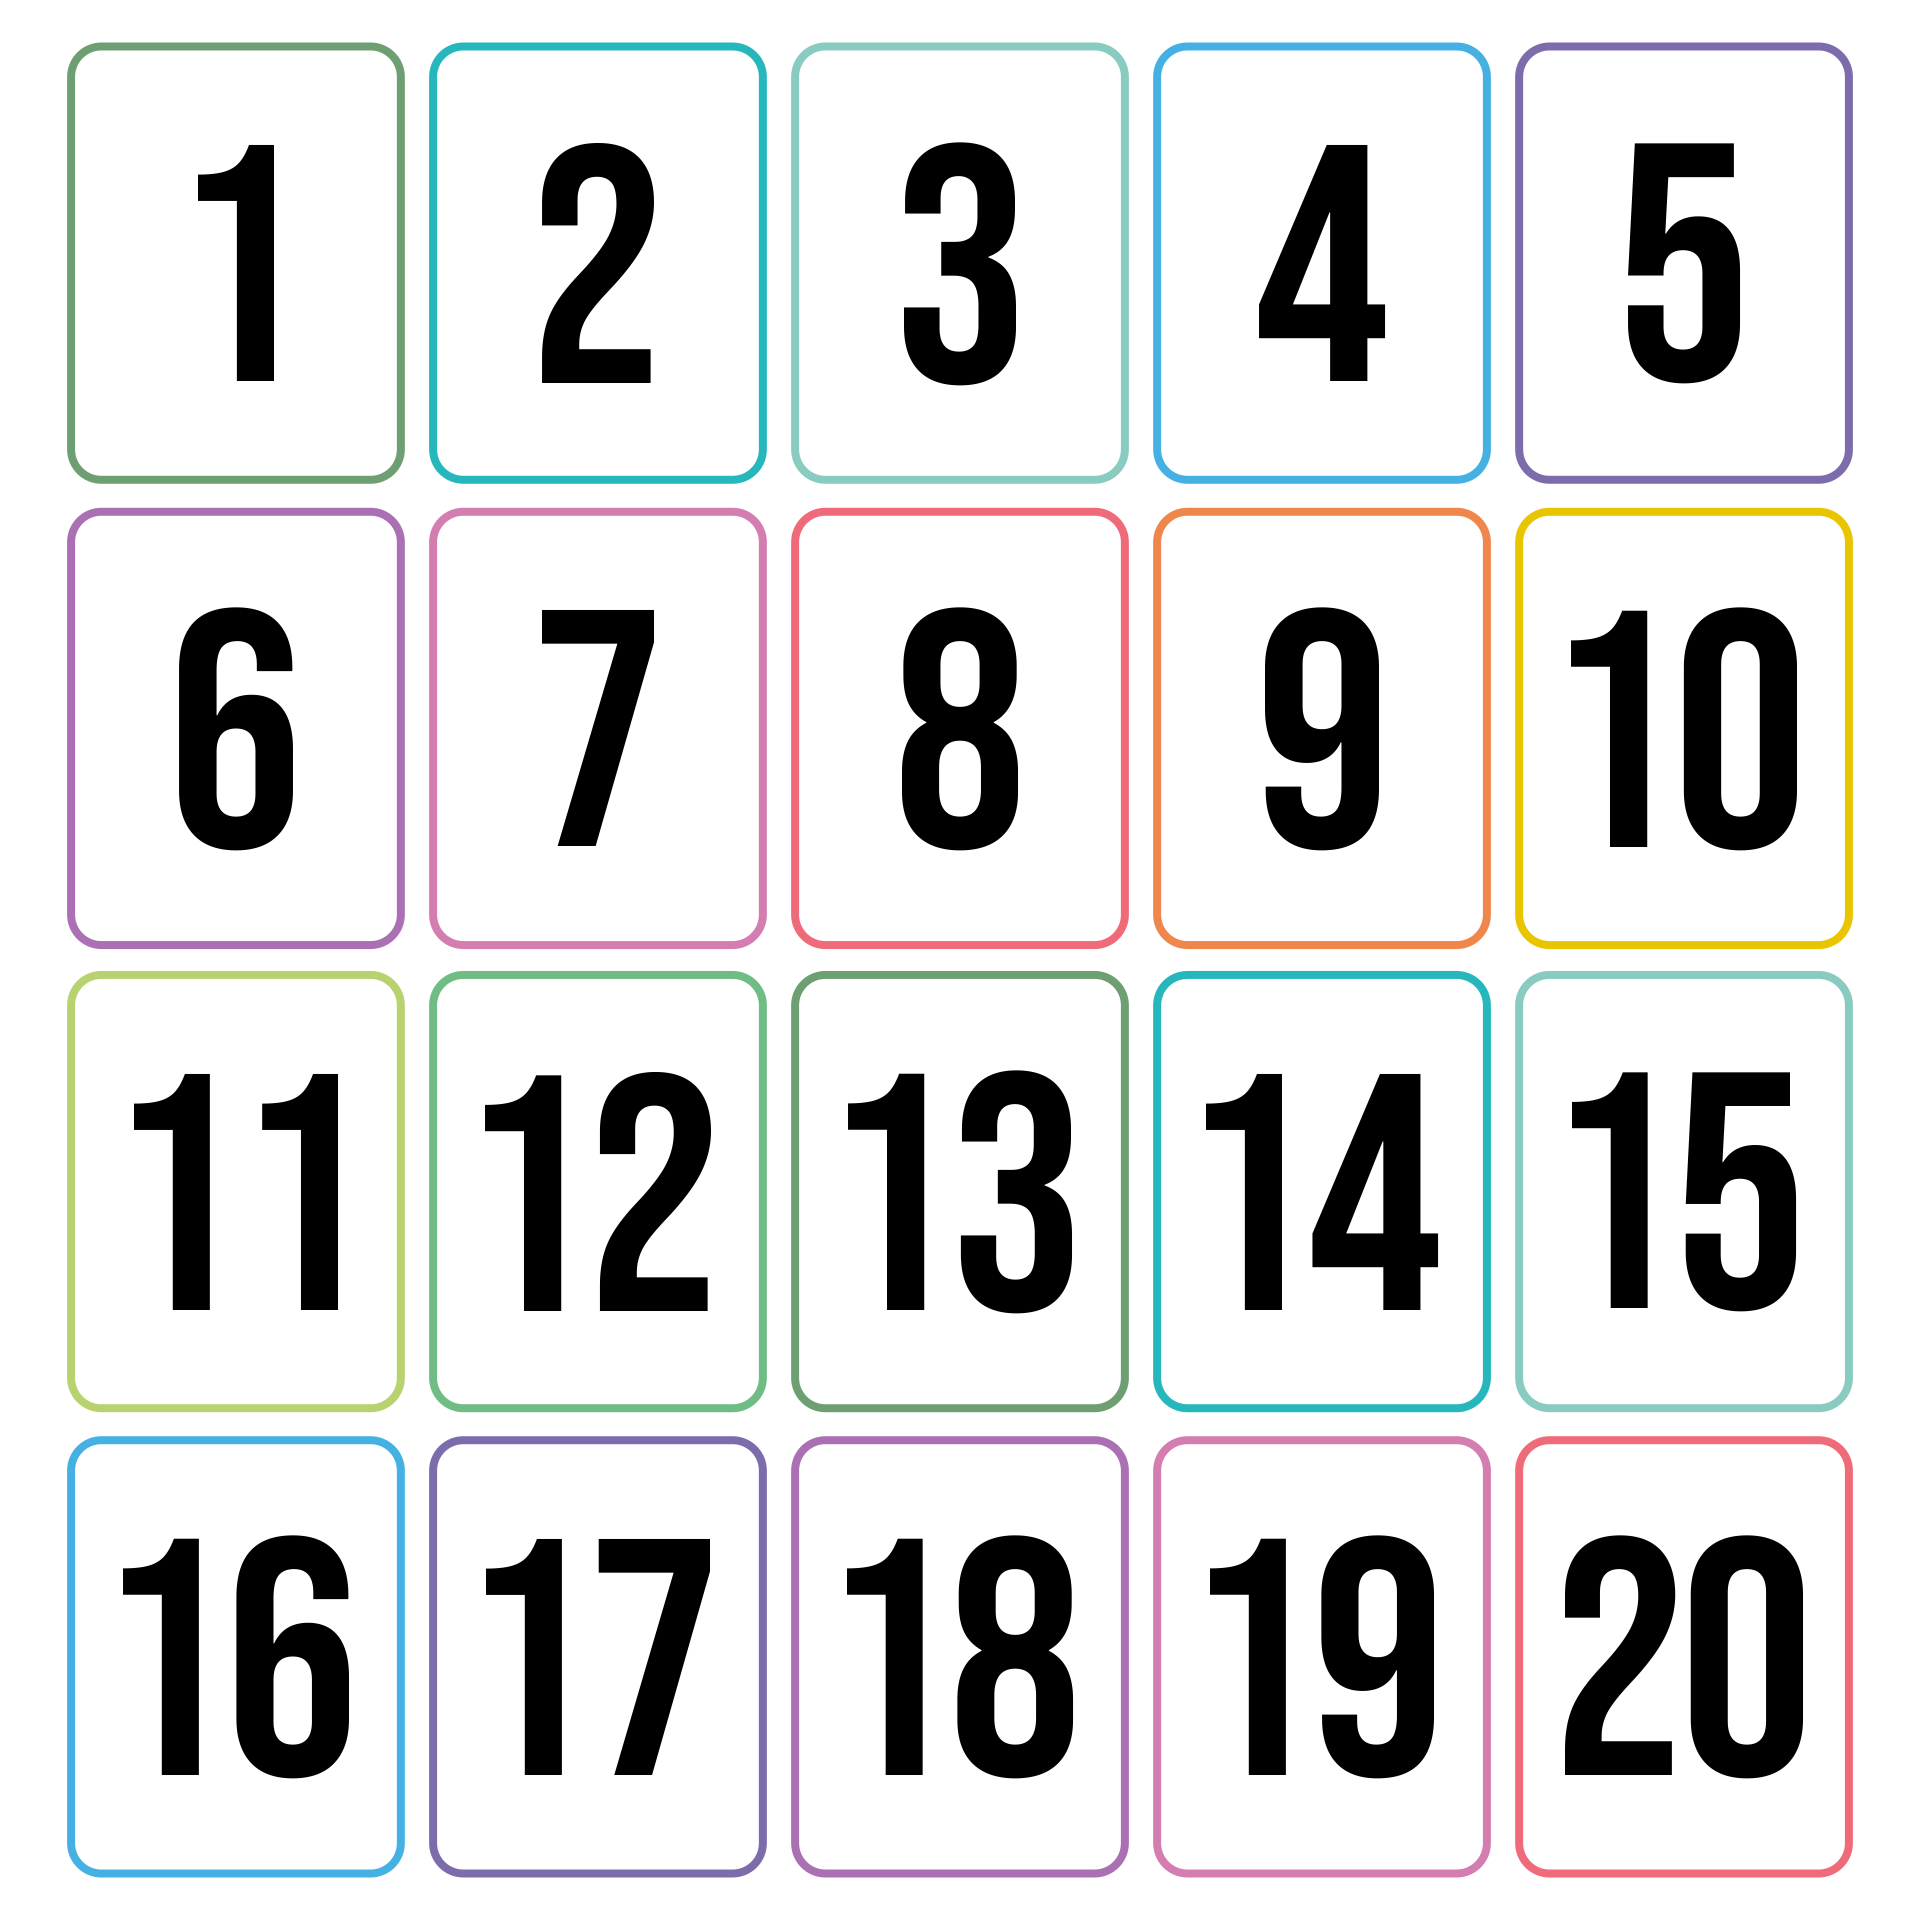 free-number-flash-cards-1-100-flashcards-for-learning-number